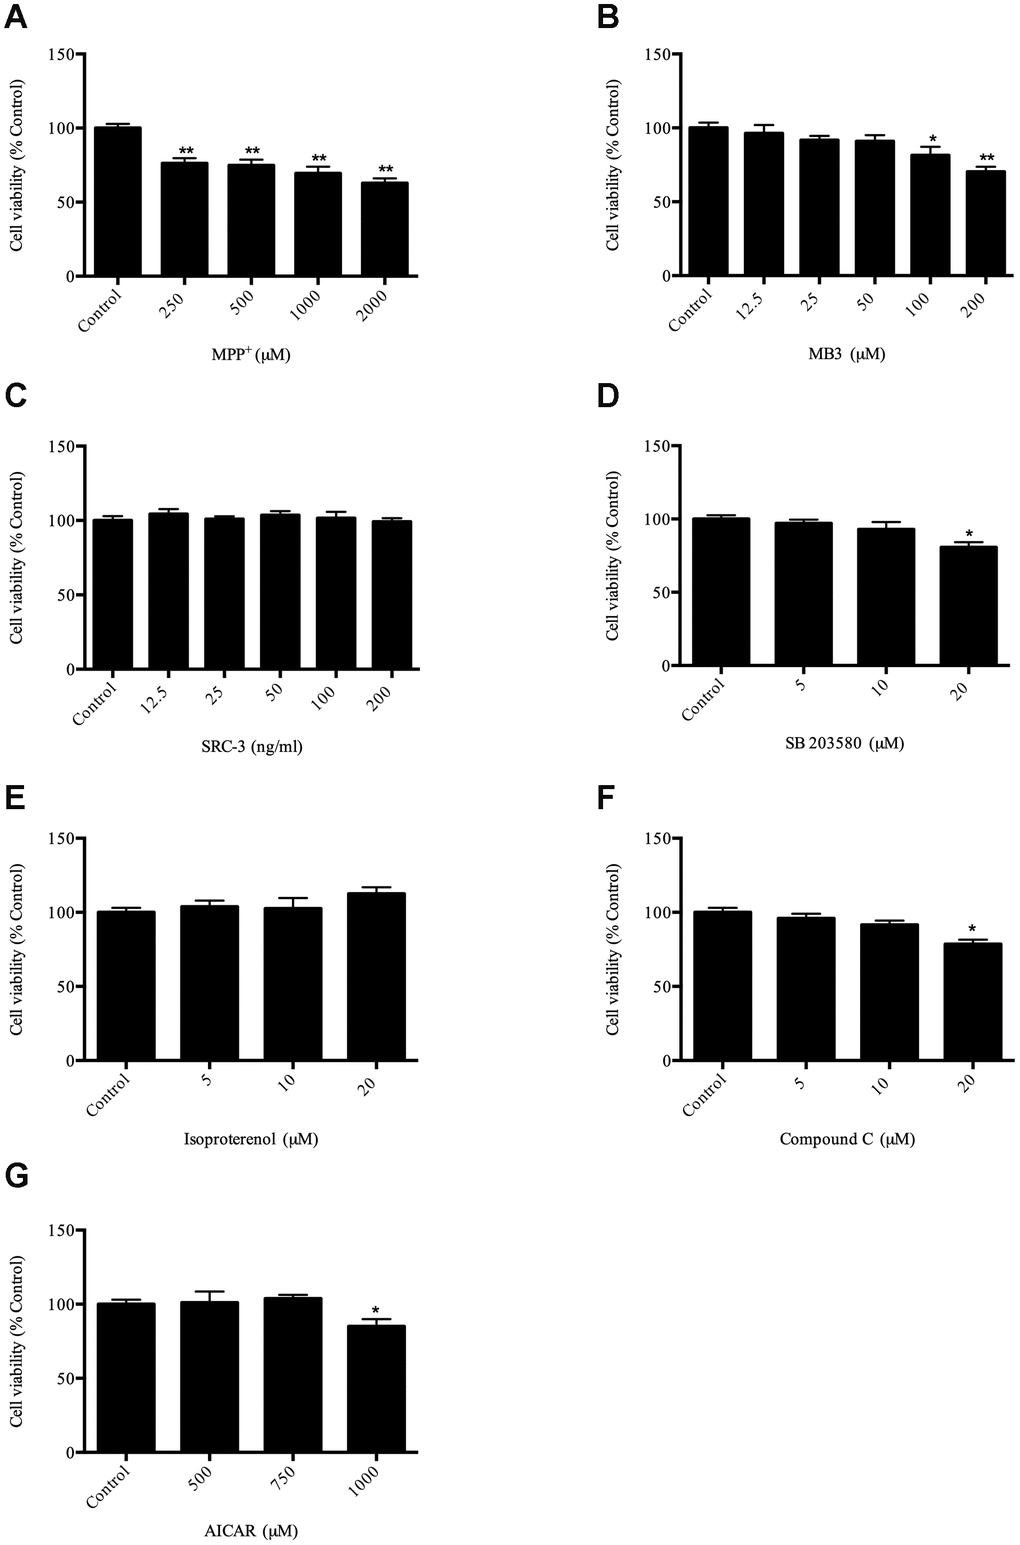 Evaluation of compounds on cell viability (A) cell viability after MPP+ treatment; (B) cell viability after MB-3 treatment; (C) cell viability after SRC-3 treatment; (D) cell viability after SB203580 treatment; (E) cell viability after isoproterenol treatment; (F) cell viability after Compound C treatment; (G) cell viability after AICAR treatment. * P P 